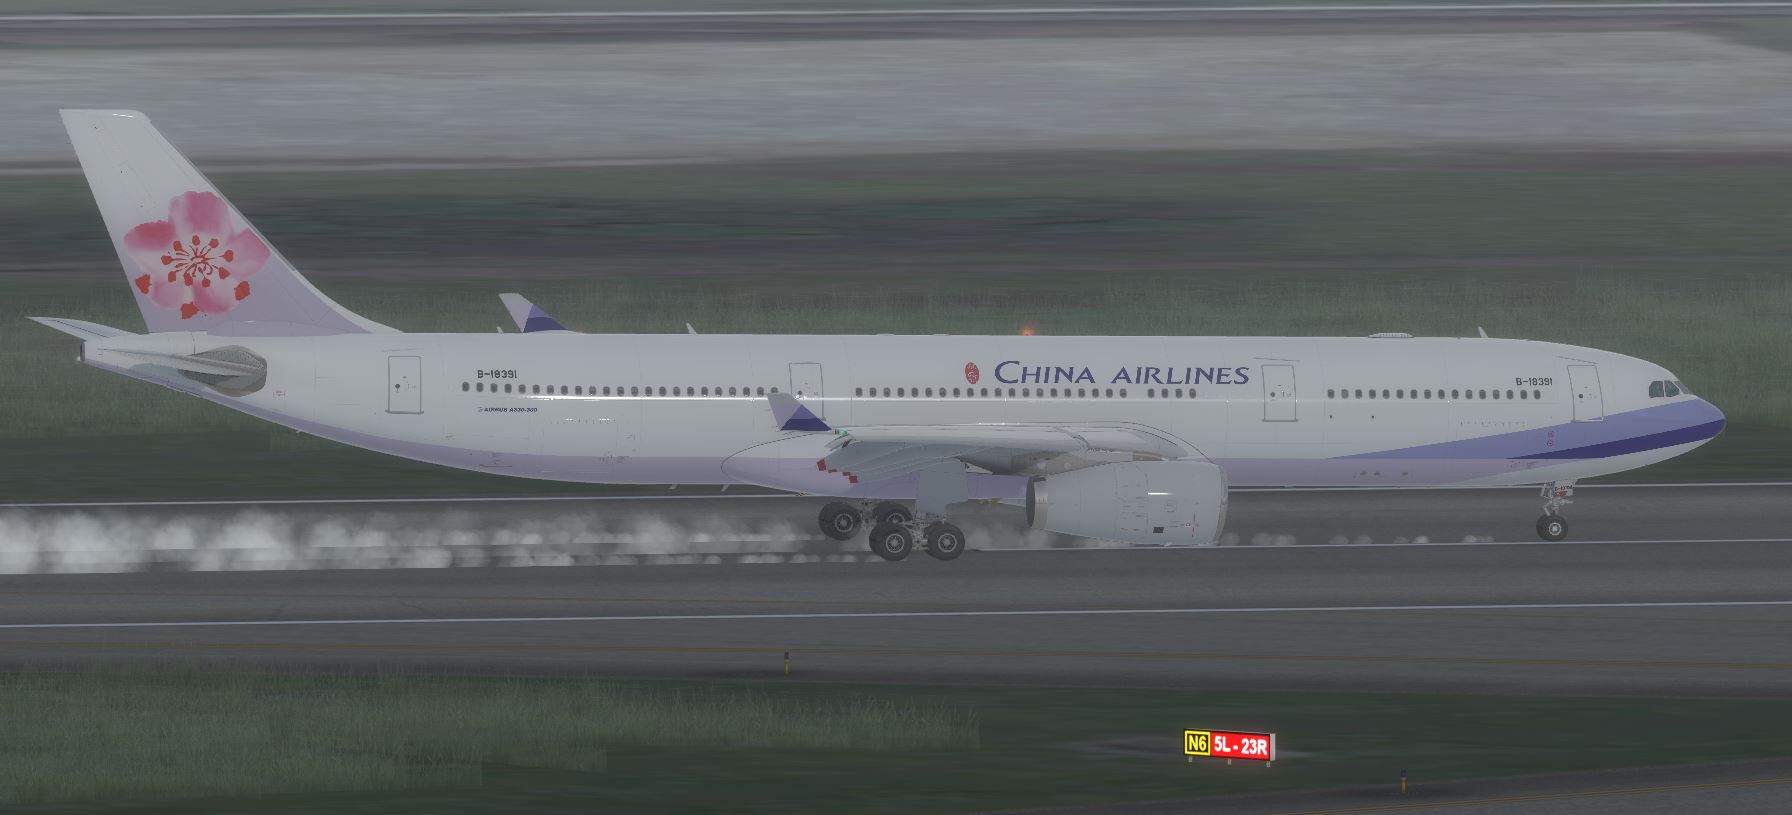 AS A330 ChinaAirline-1026 